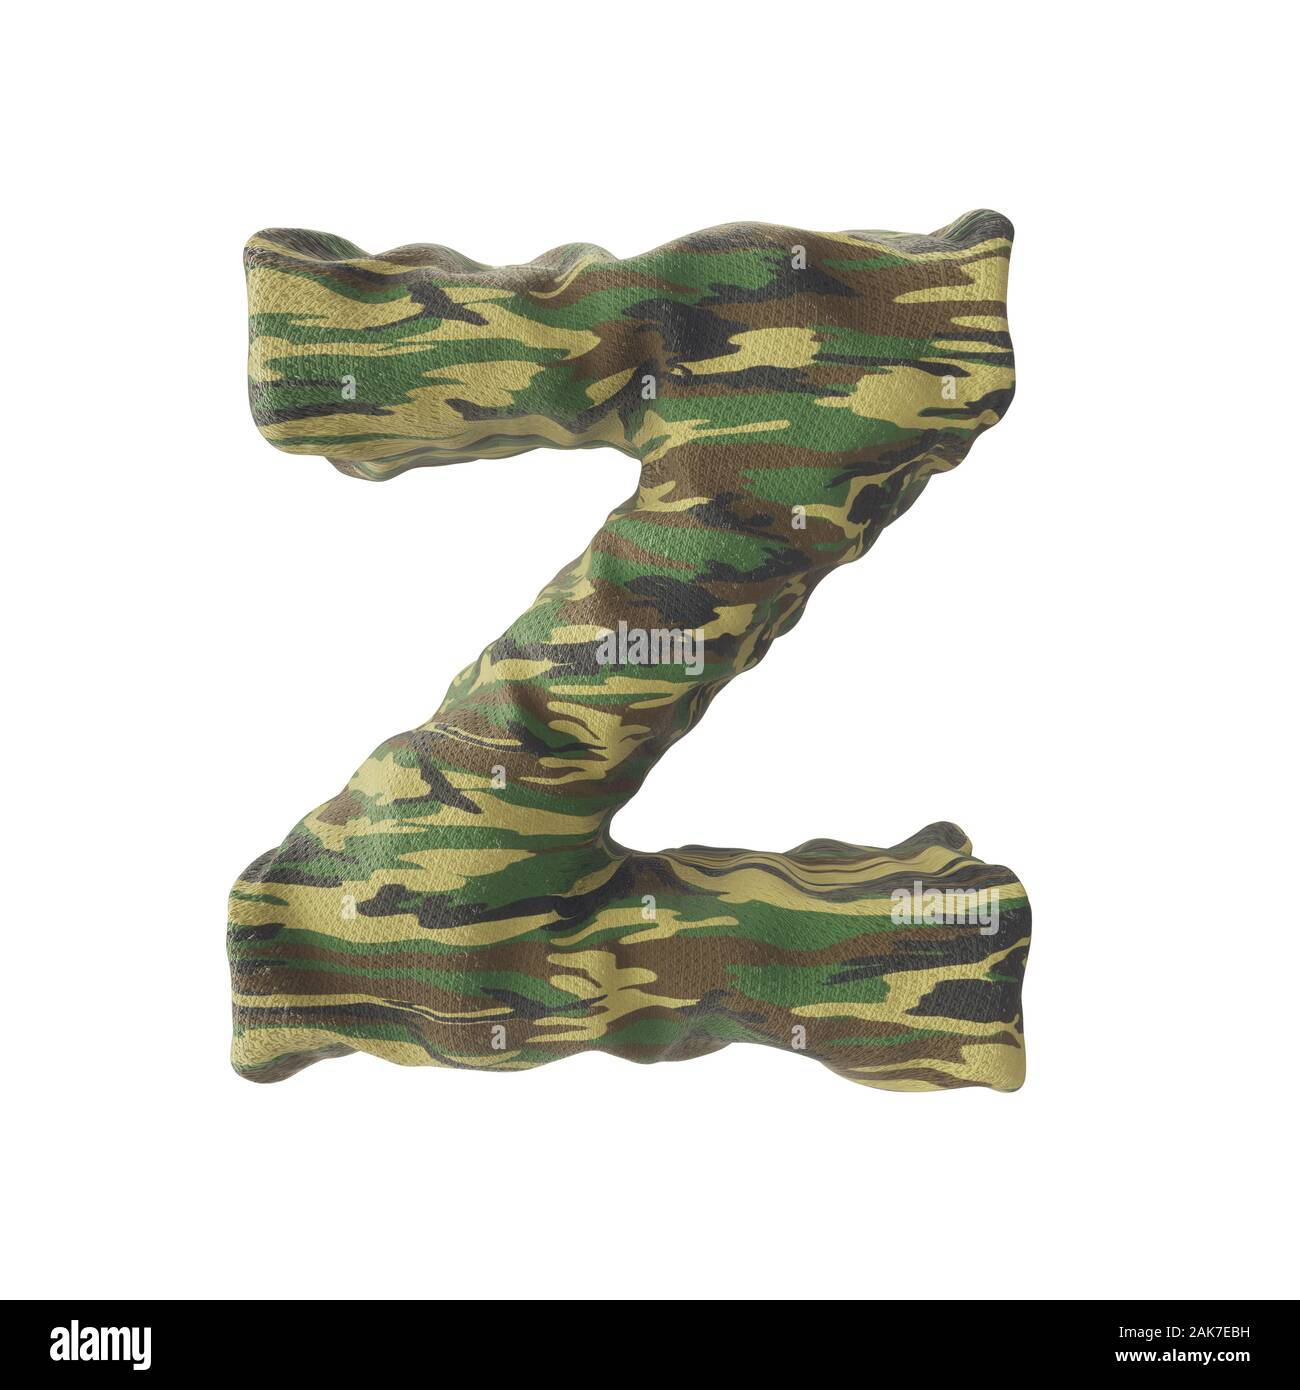 Camouflage english alphabets font texture - 3D Render Image Stock Photo